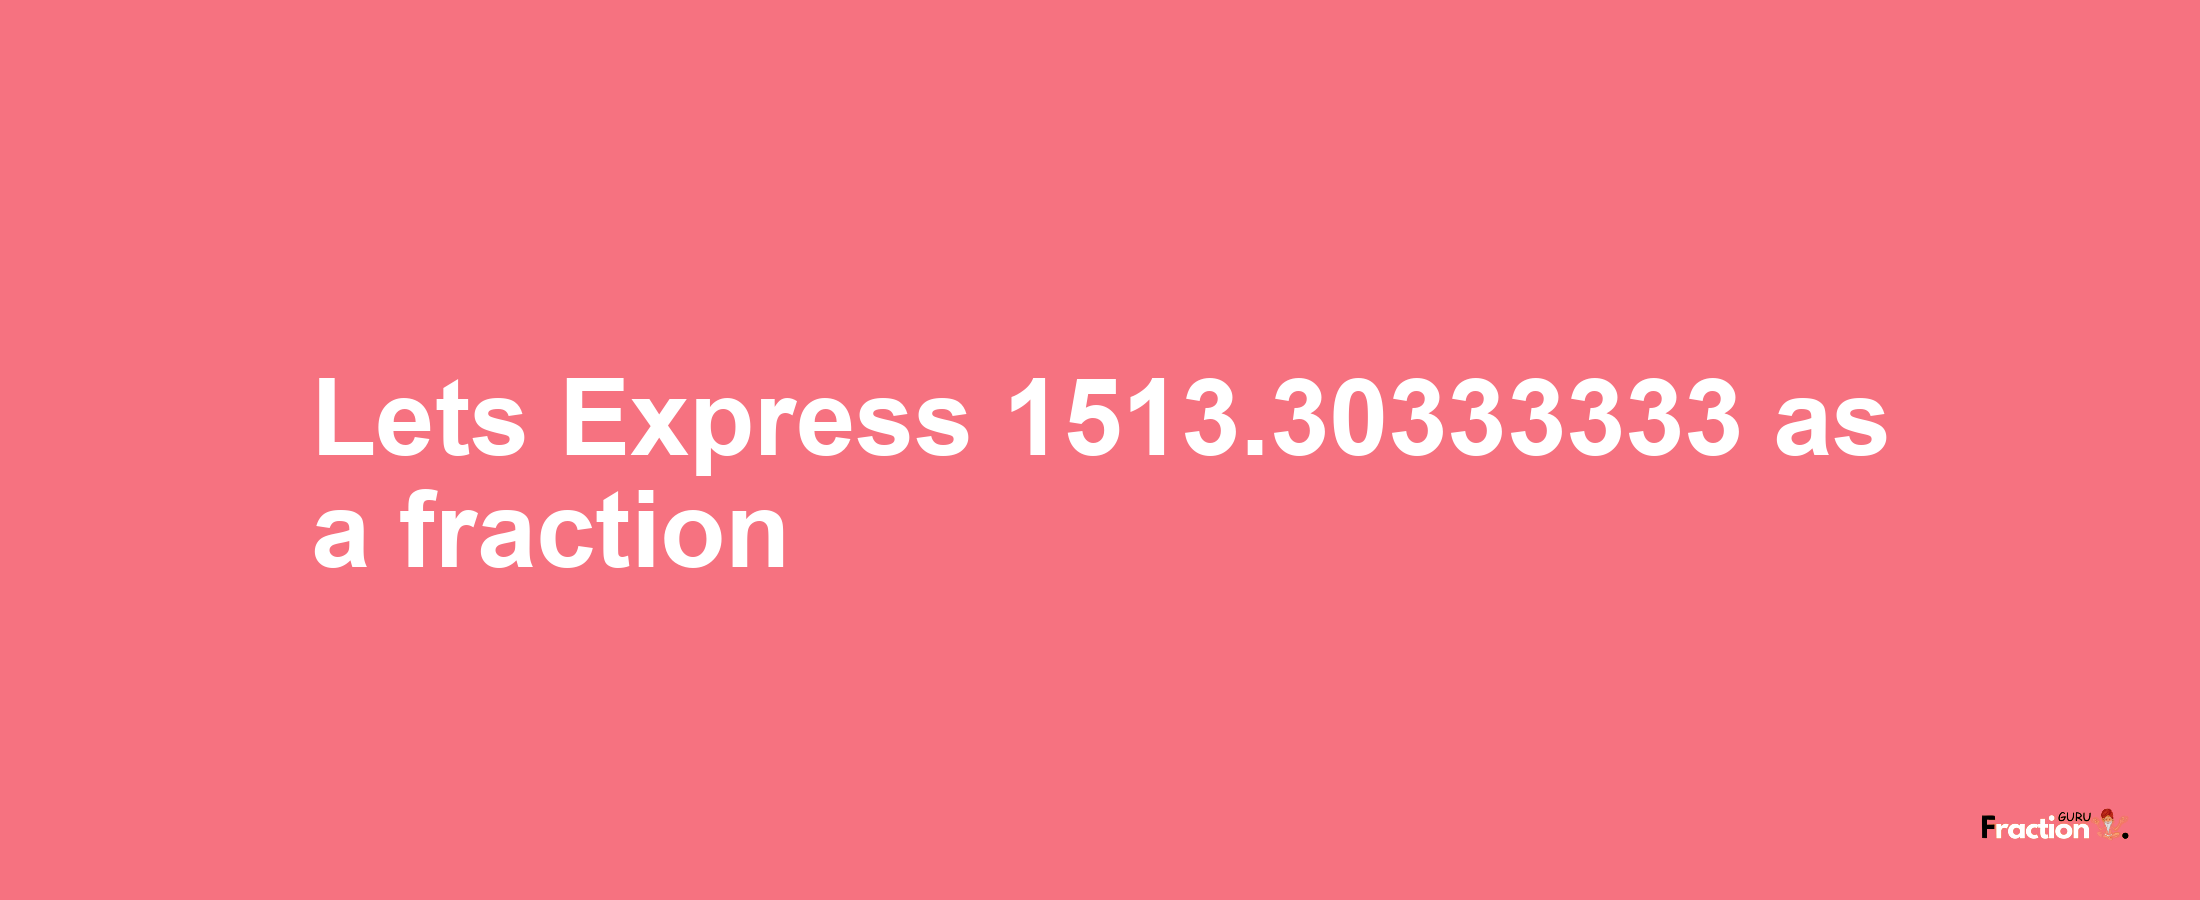 Lets Express 1513.30333333 as afraction